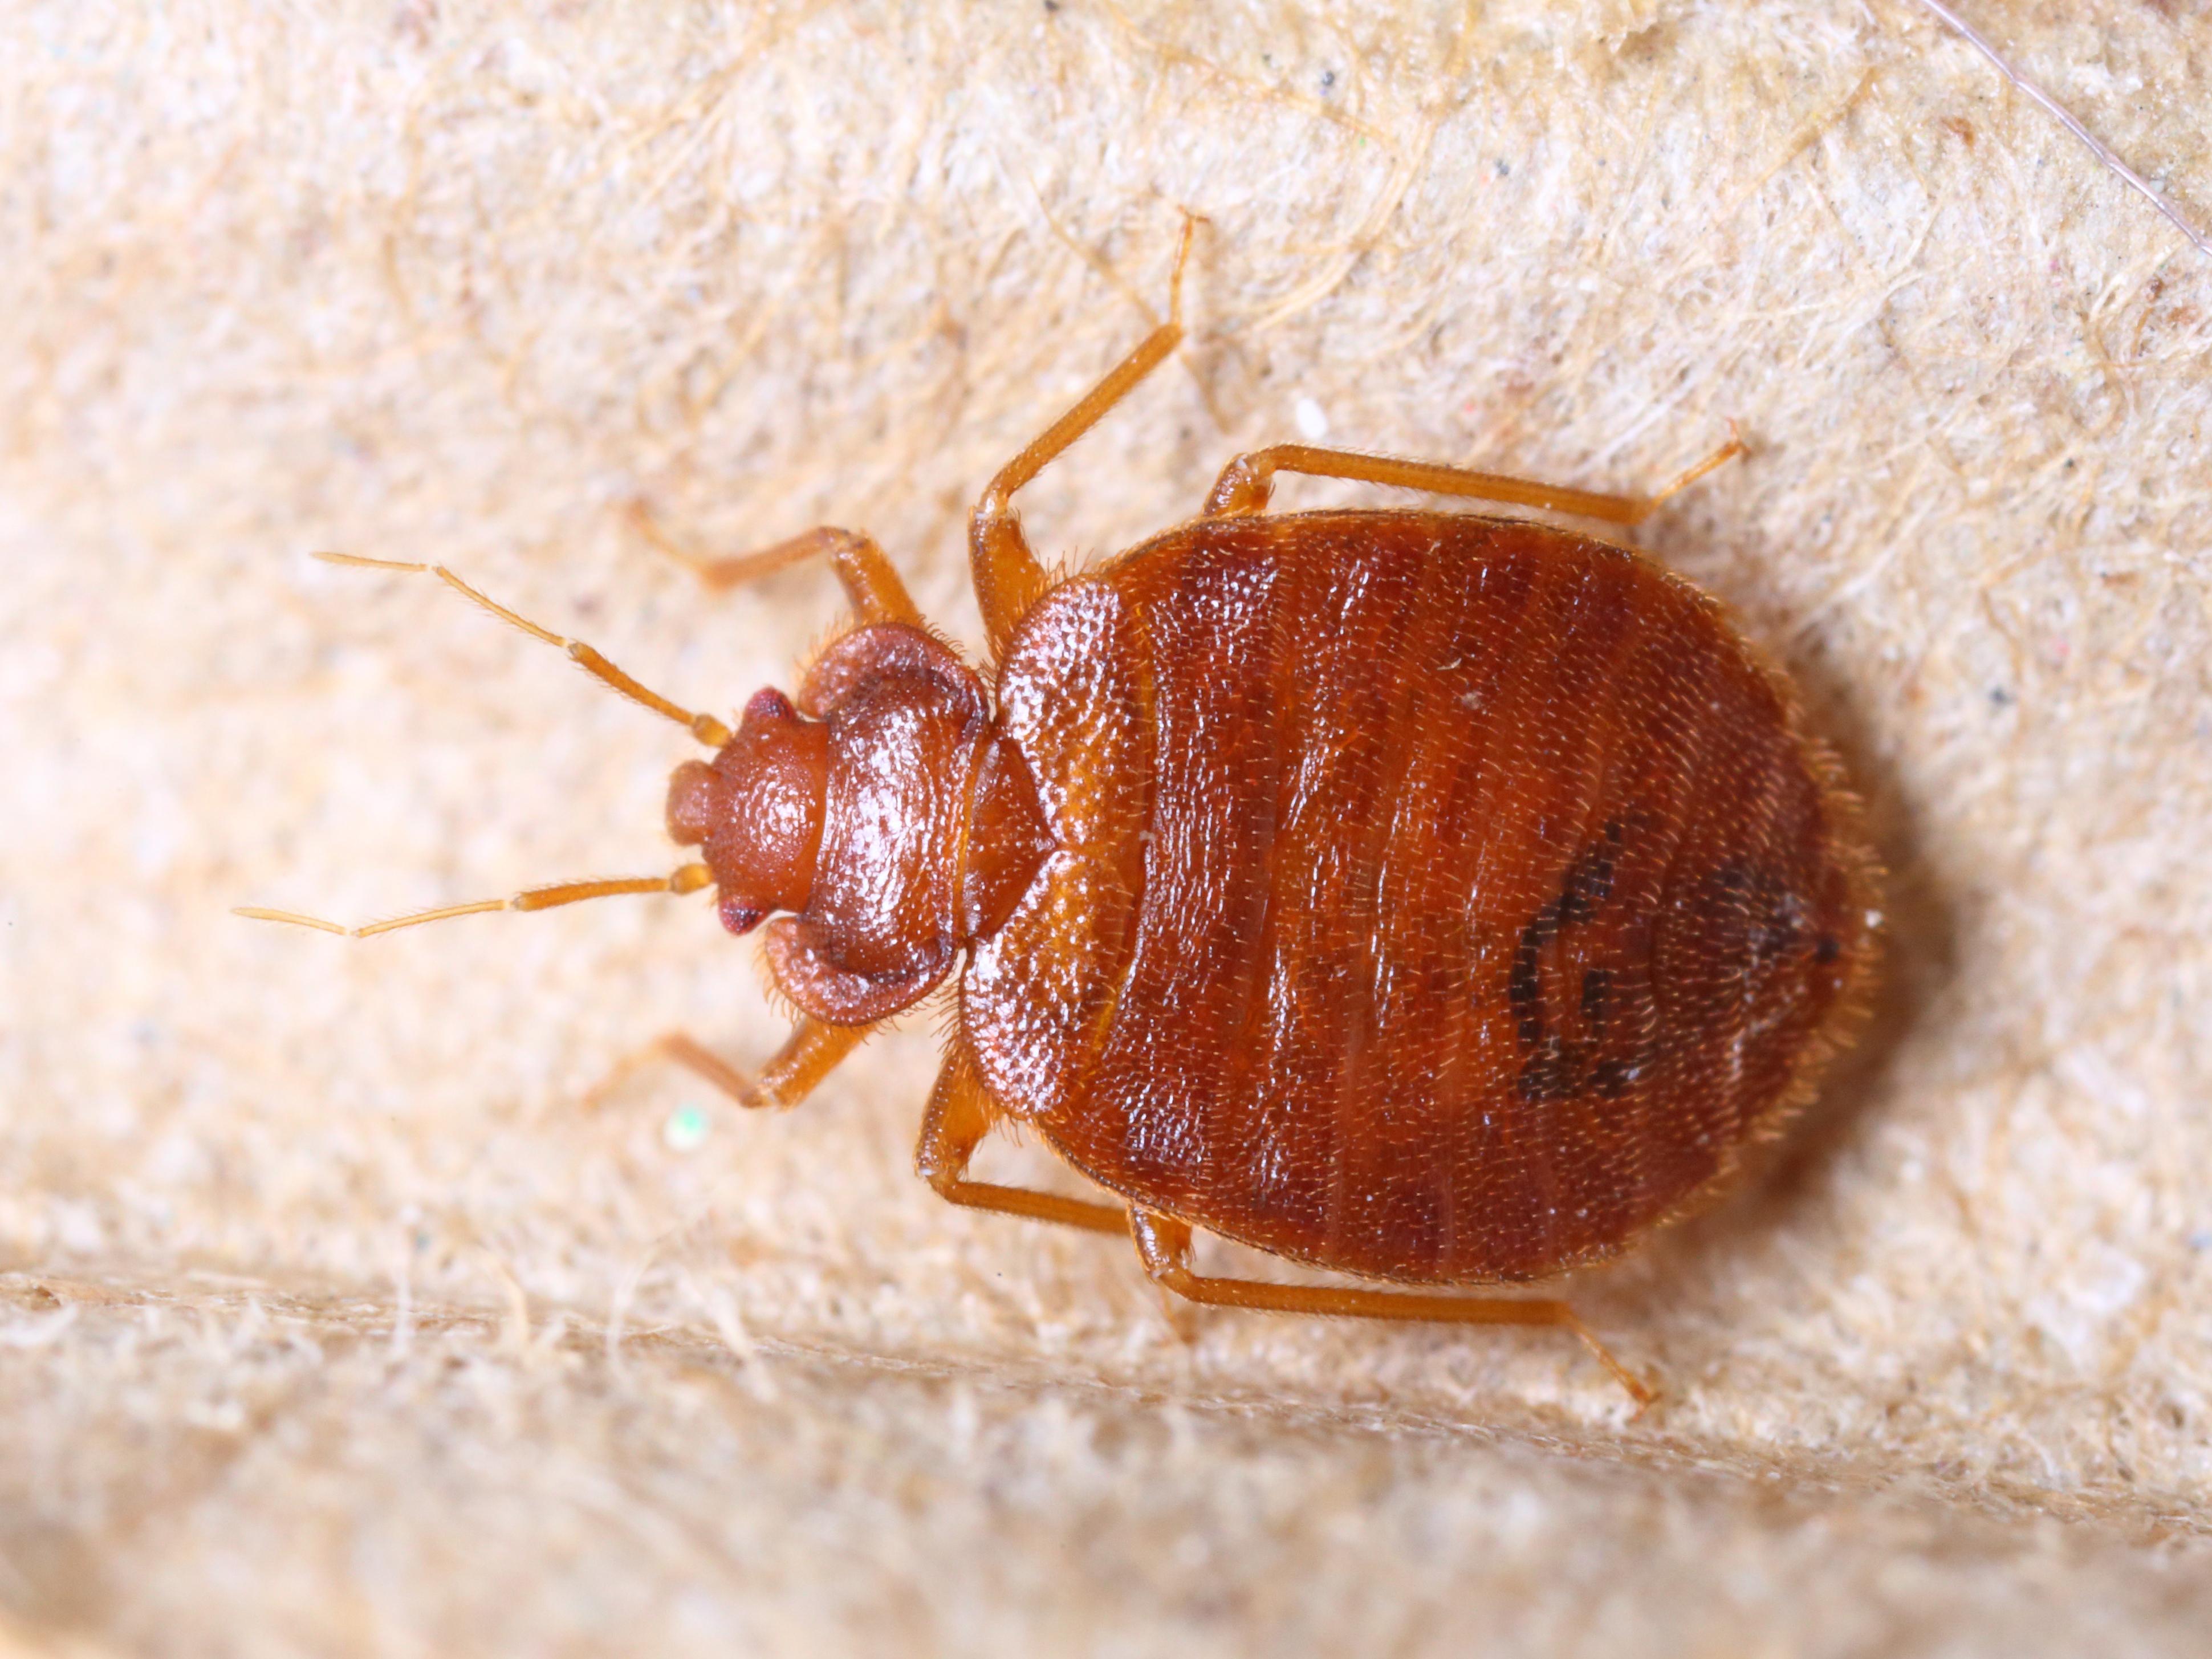 Can Bed Bug Traps Get Rid of Bed Bug Infestation?